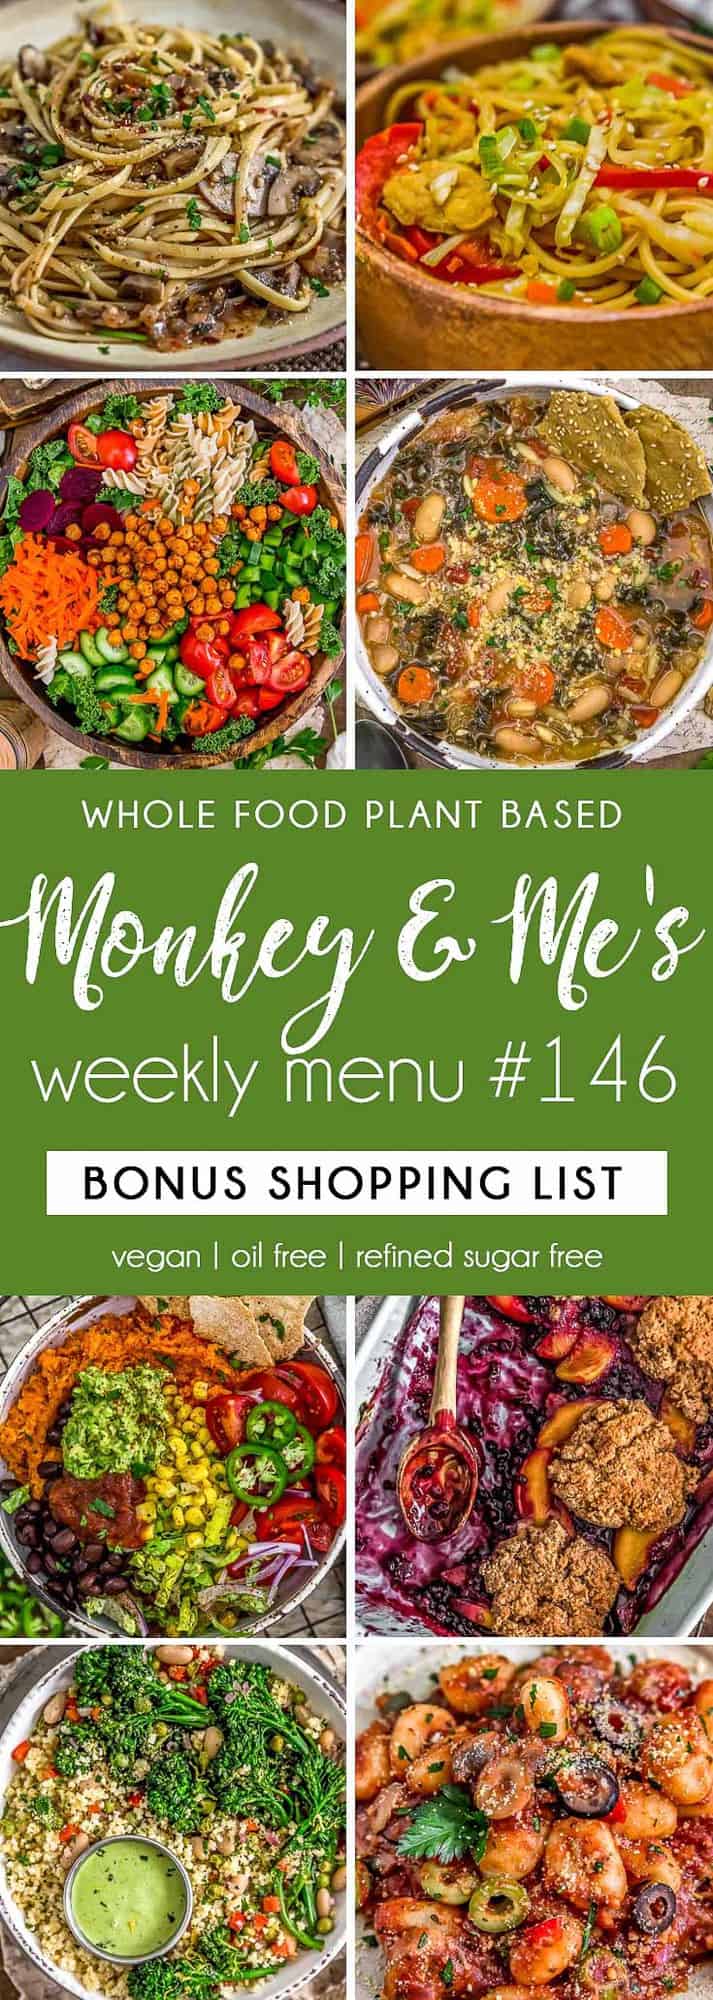 Monkey and Me's Menu 146 featuring 8 recipes